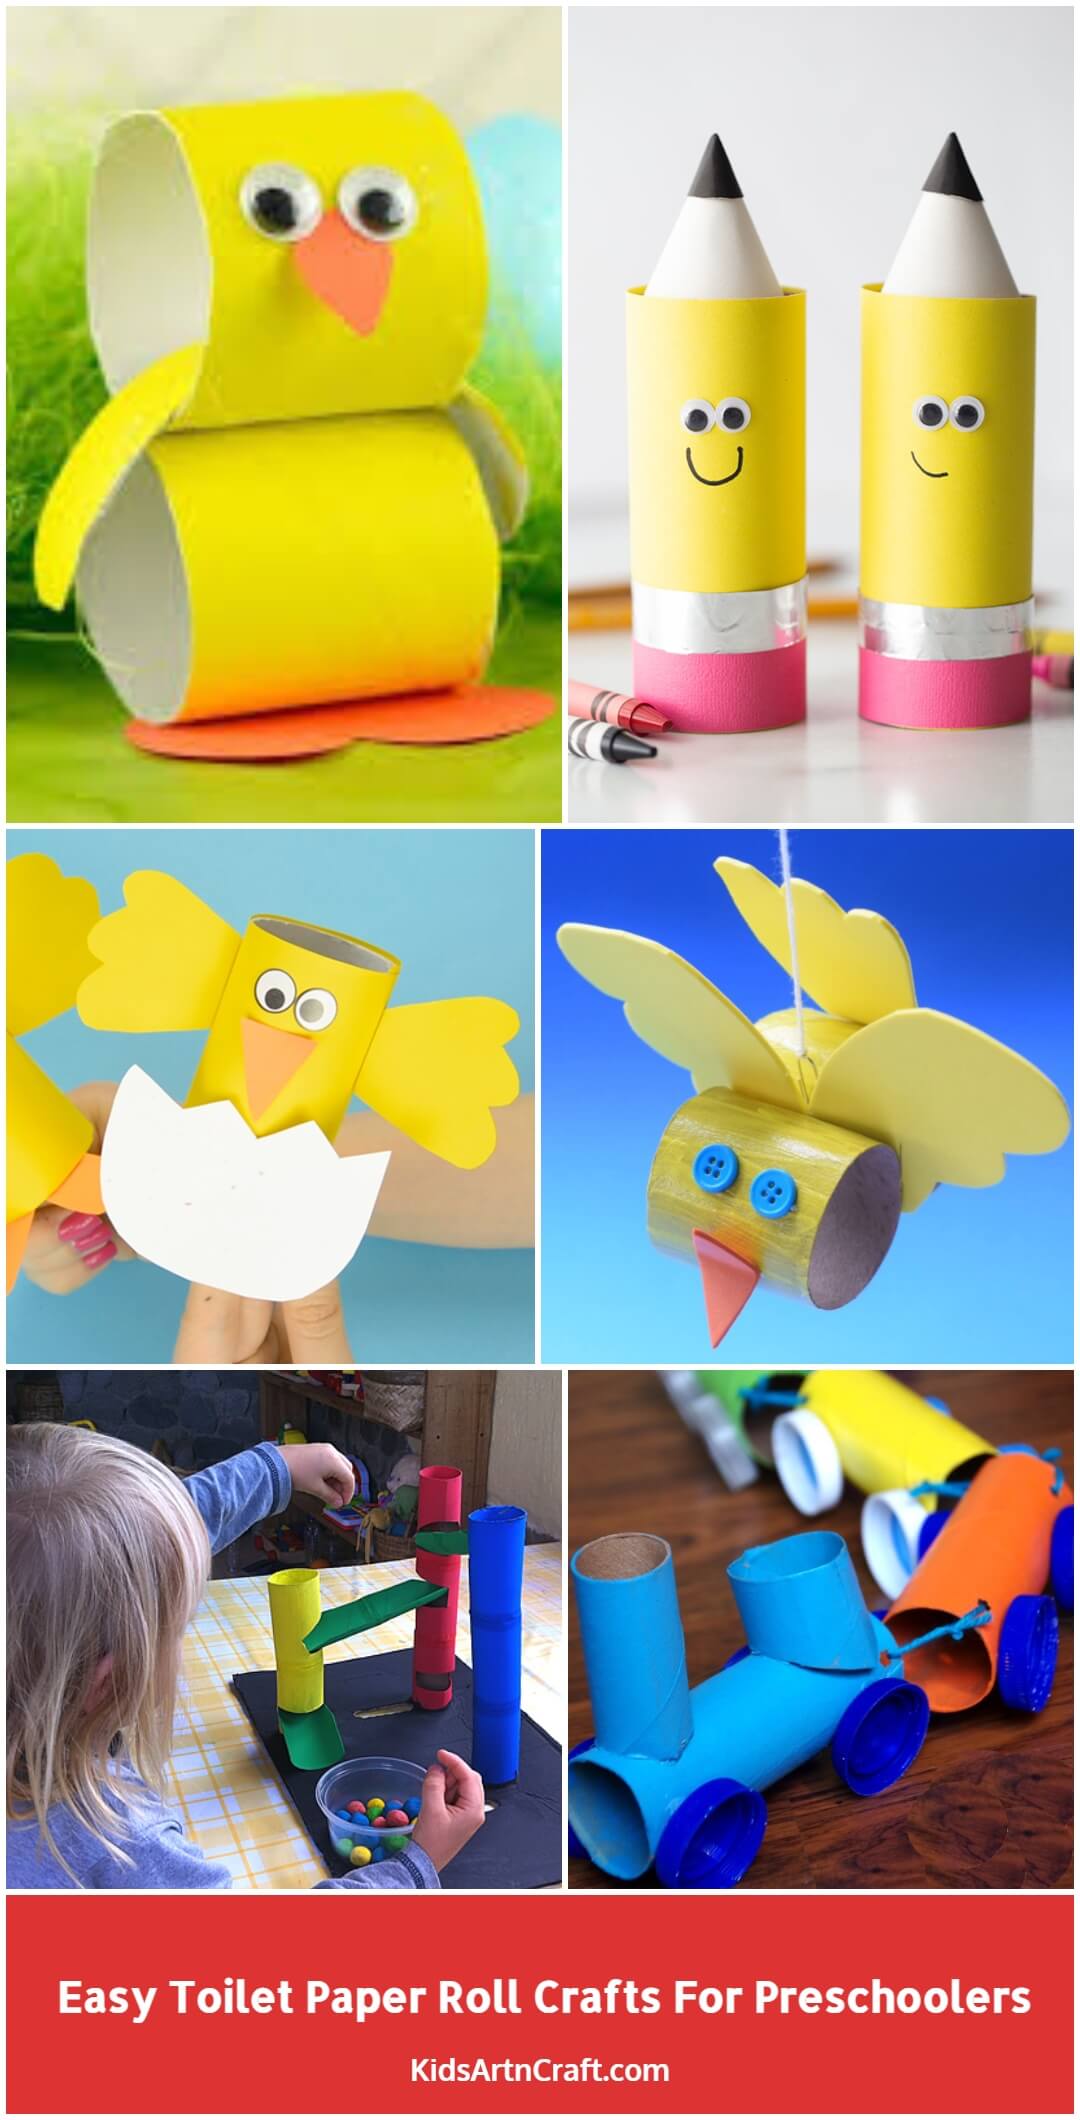 Easy Toilet Paper Roll Crafts For Preschoolers